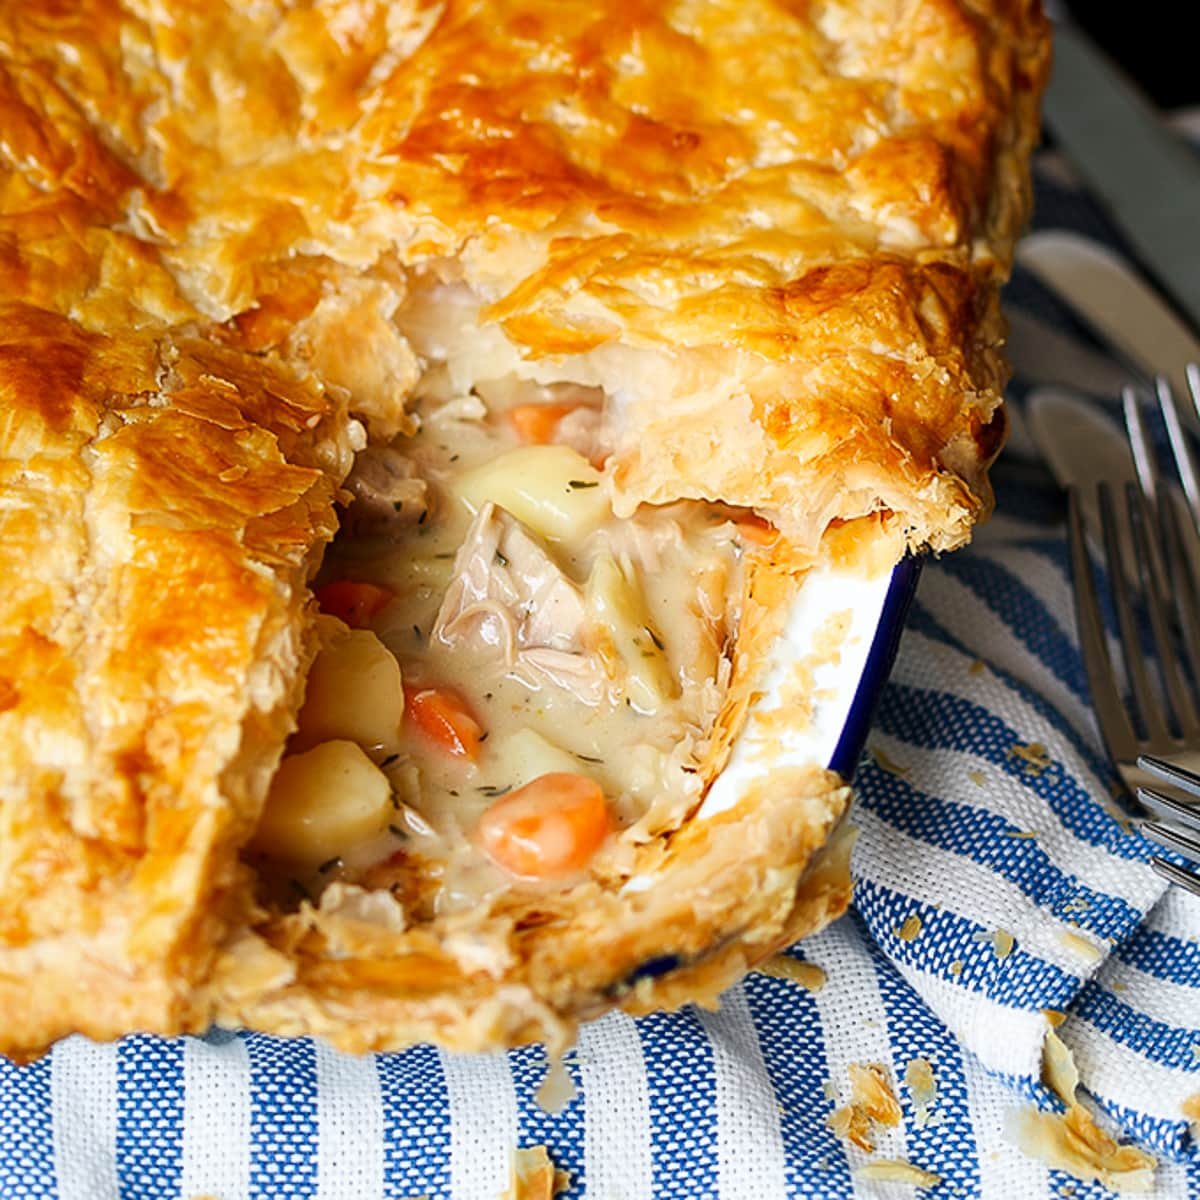 A dish of creamy chicken pie with puff pastry sat on a blue and white striped cloth.